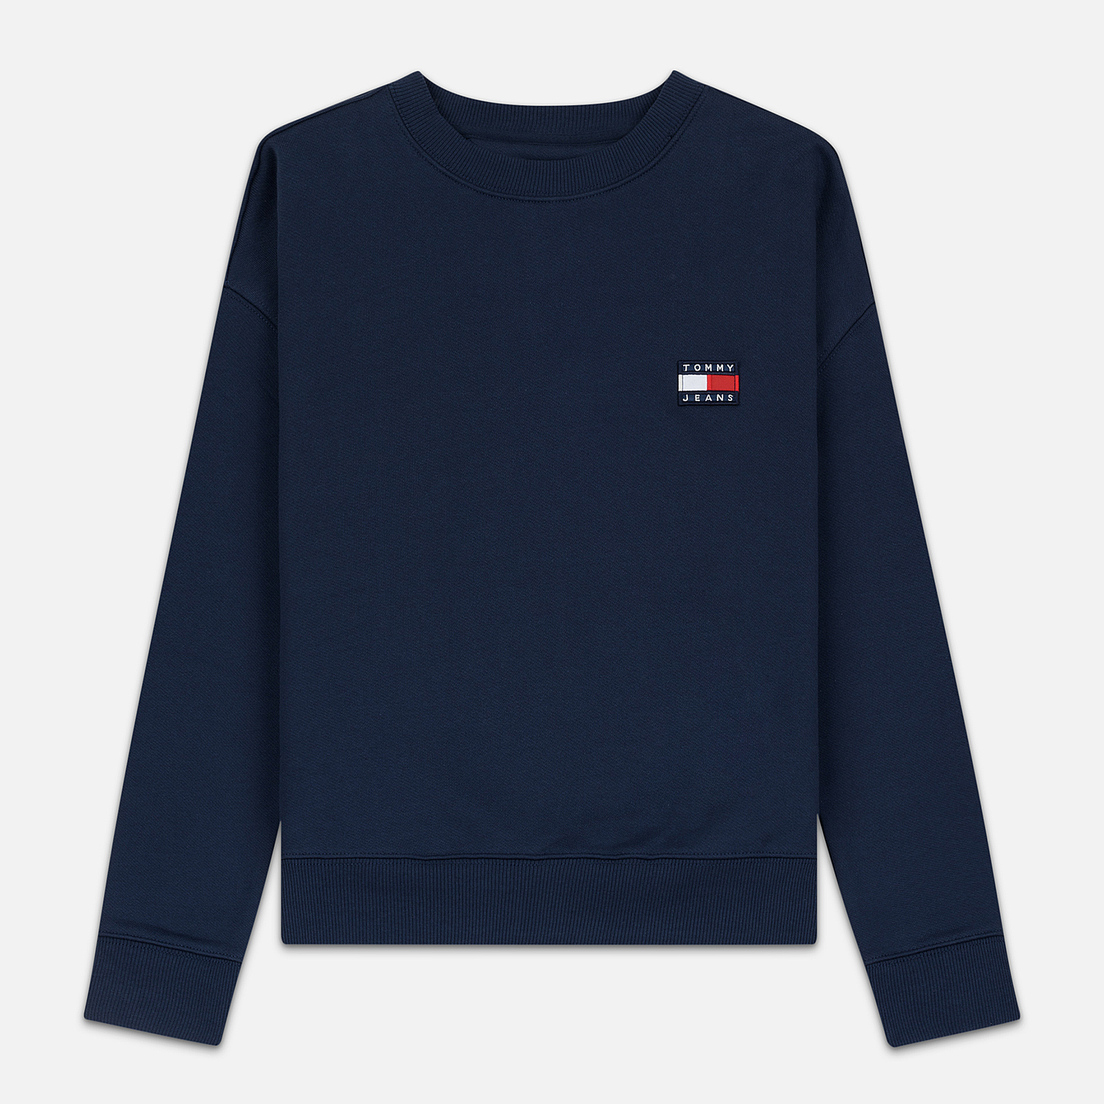 Tommy Jeans Женская толстовка Tommy Badge Crew